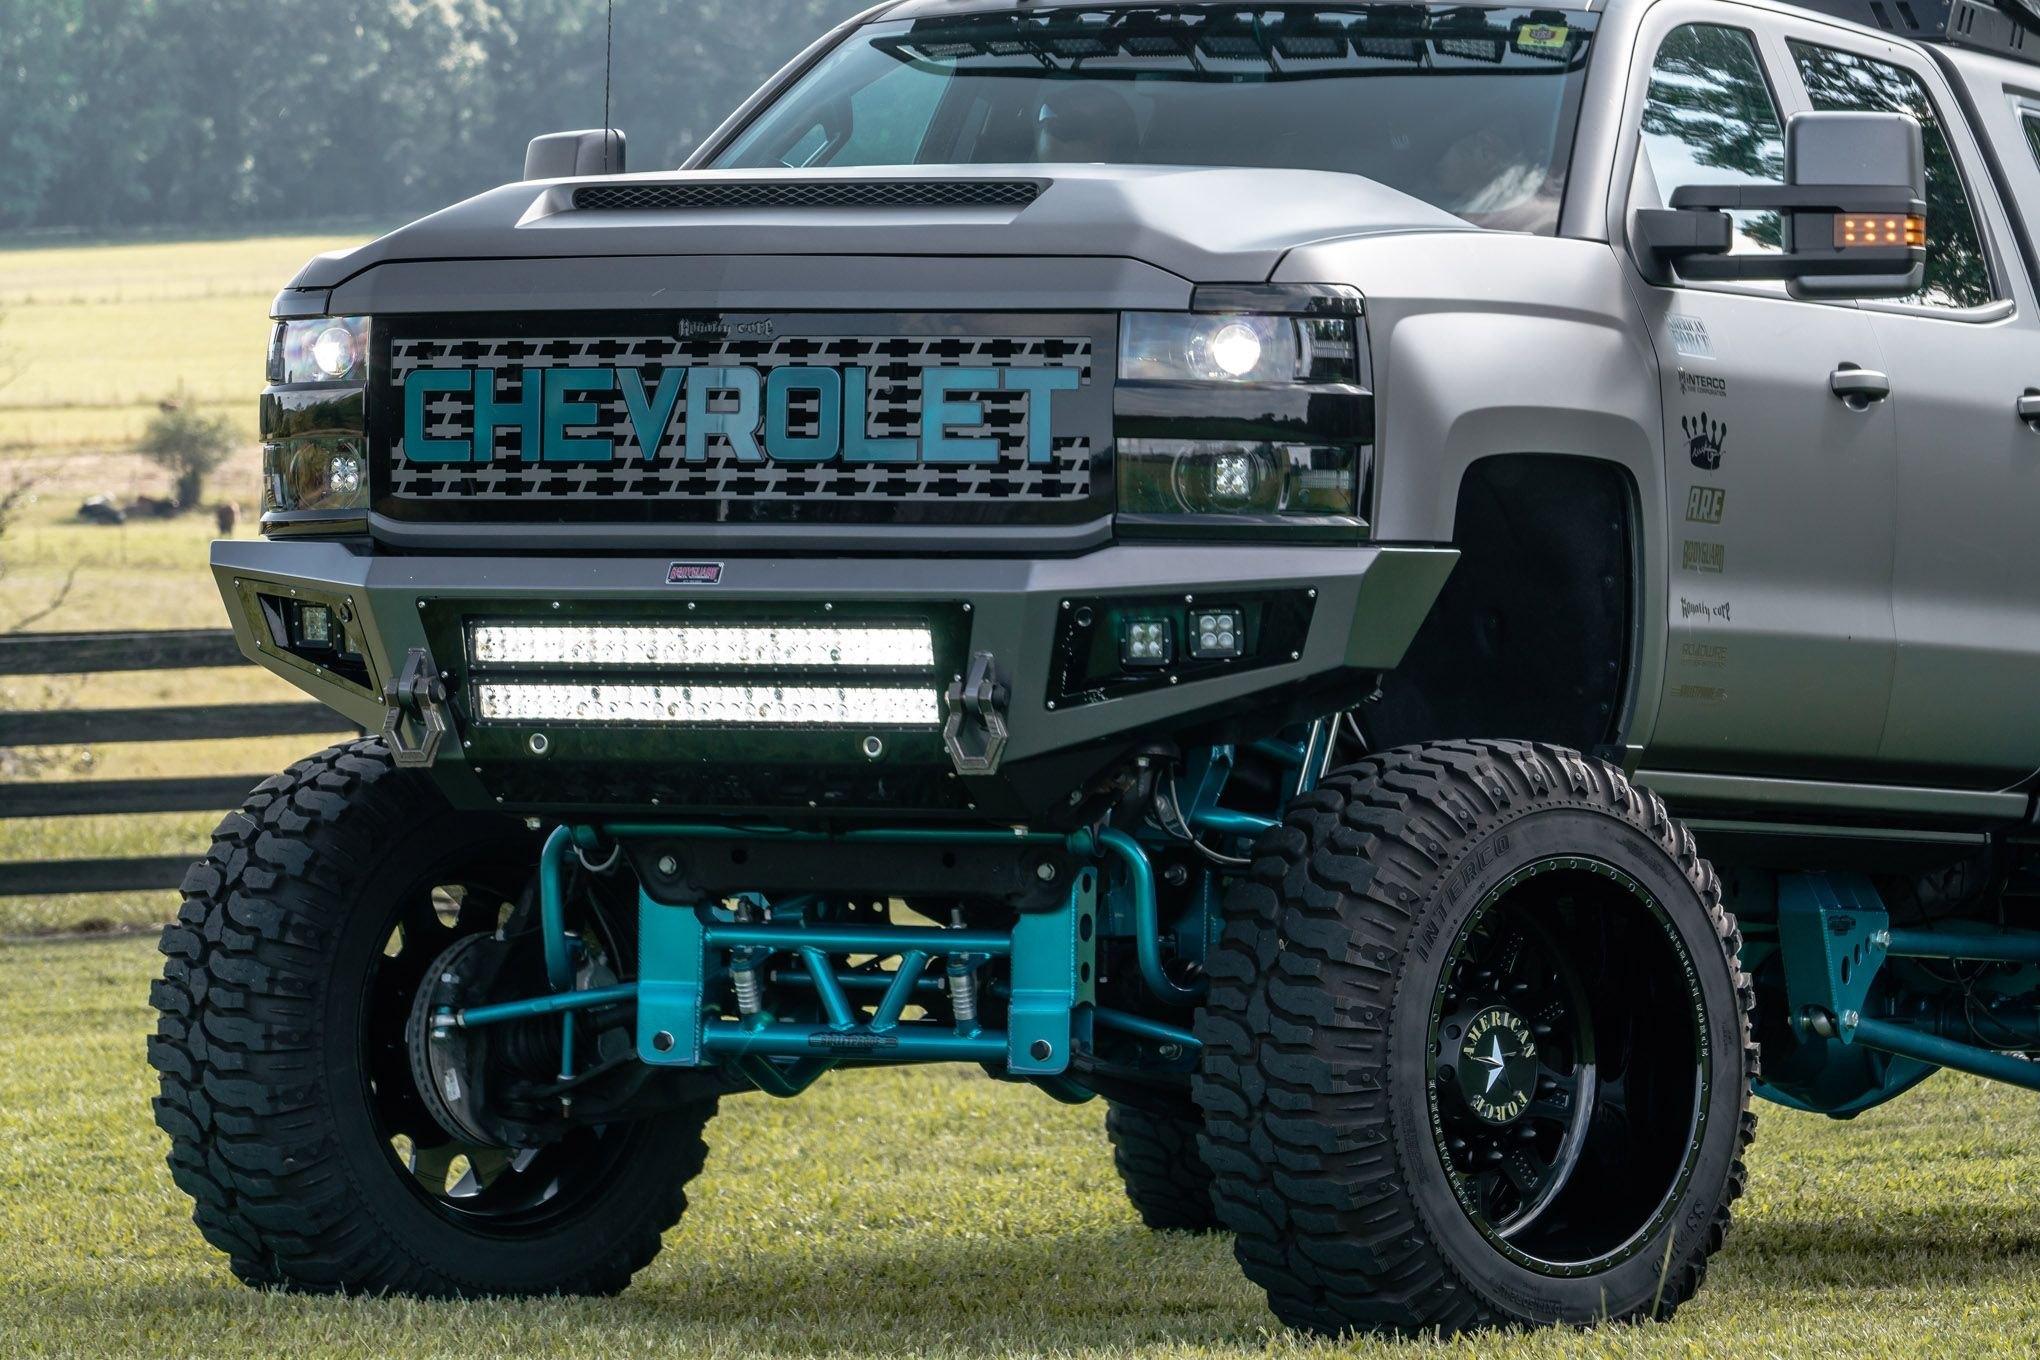 Gray Lifted Chevy Silverado with Custom Royalty Core Grille - Photo by Buddy Hernandez